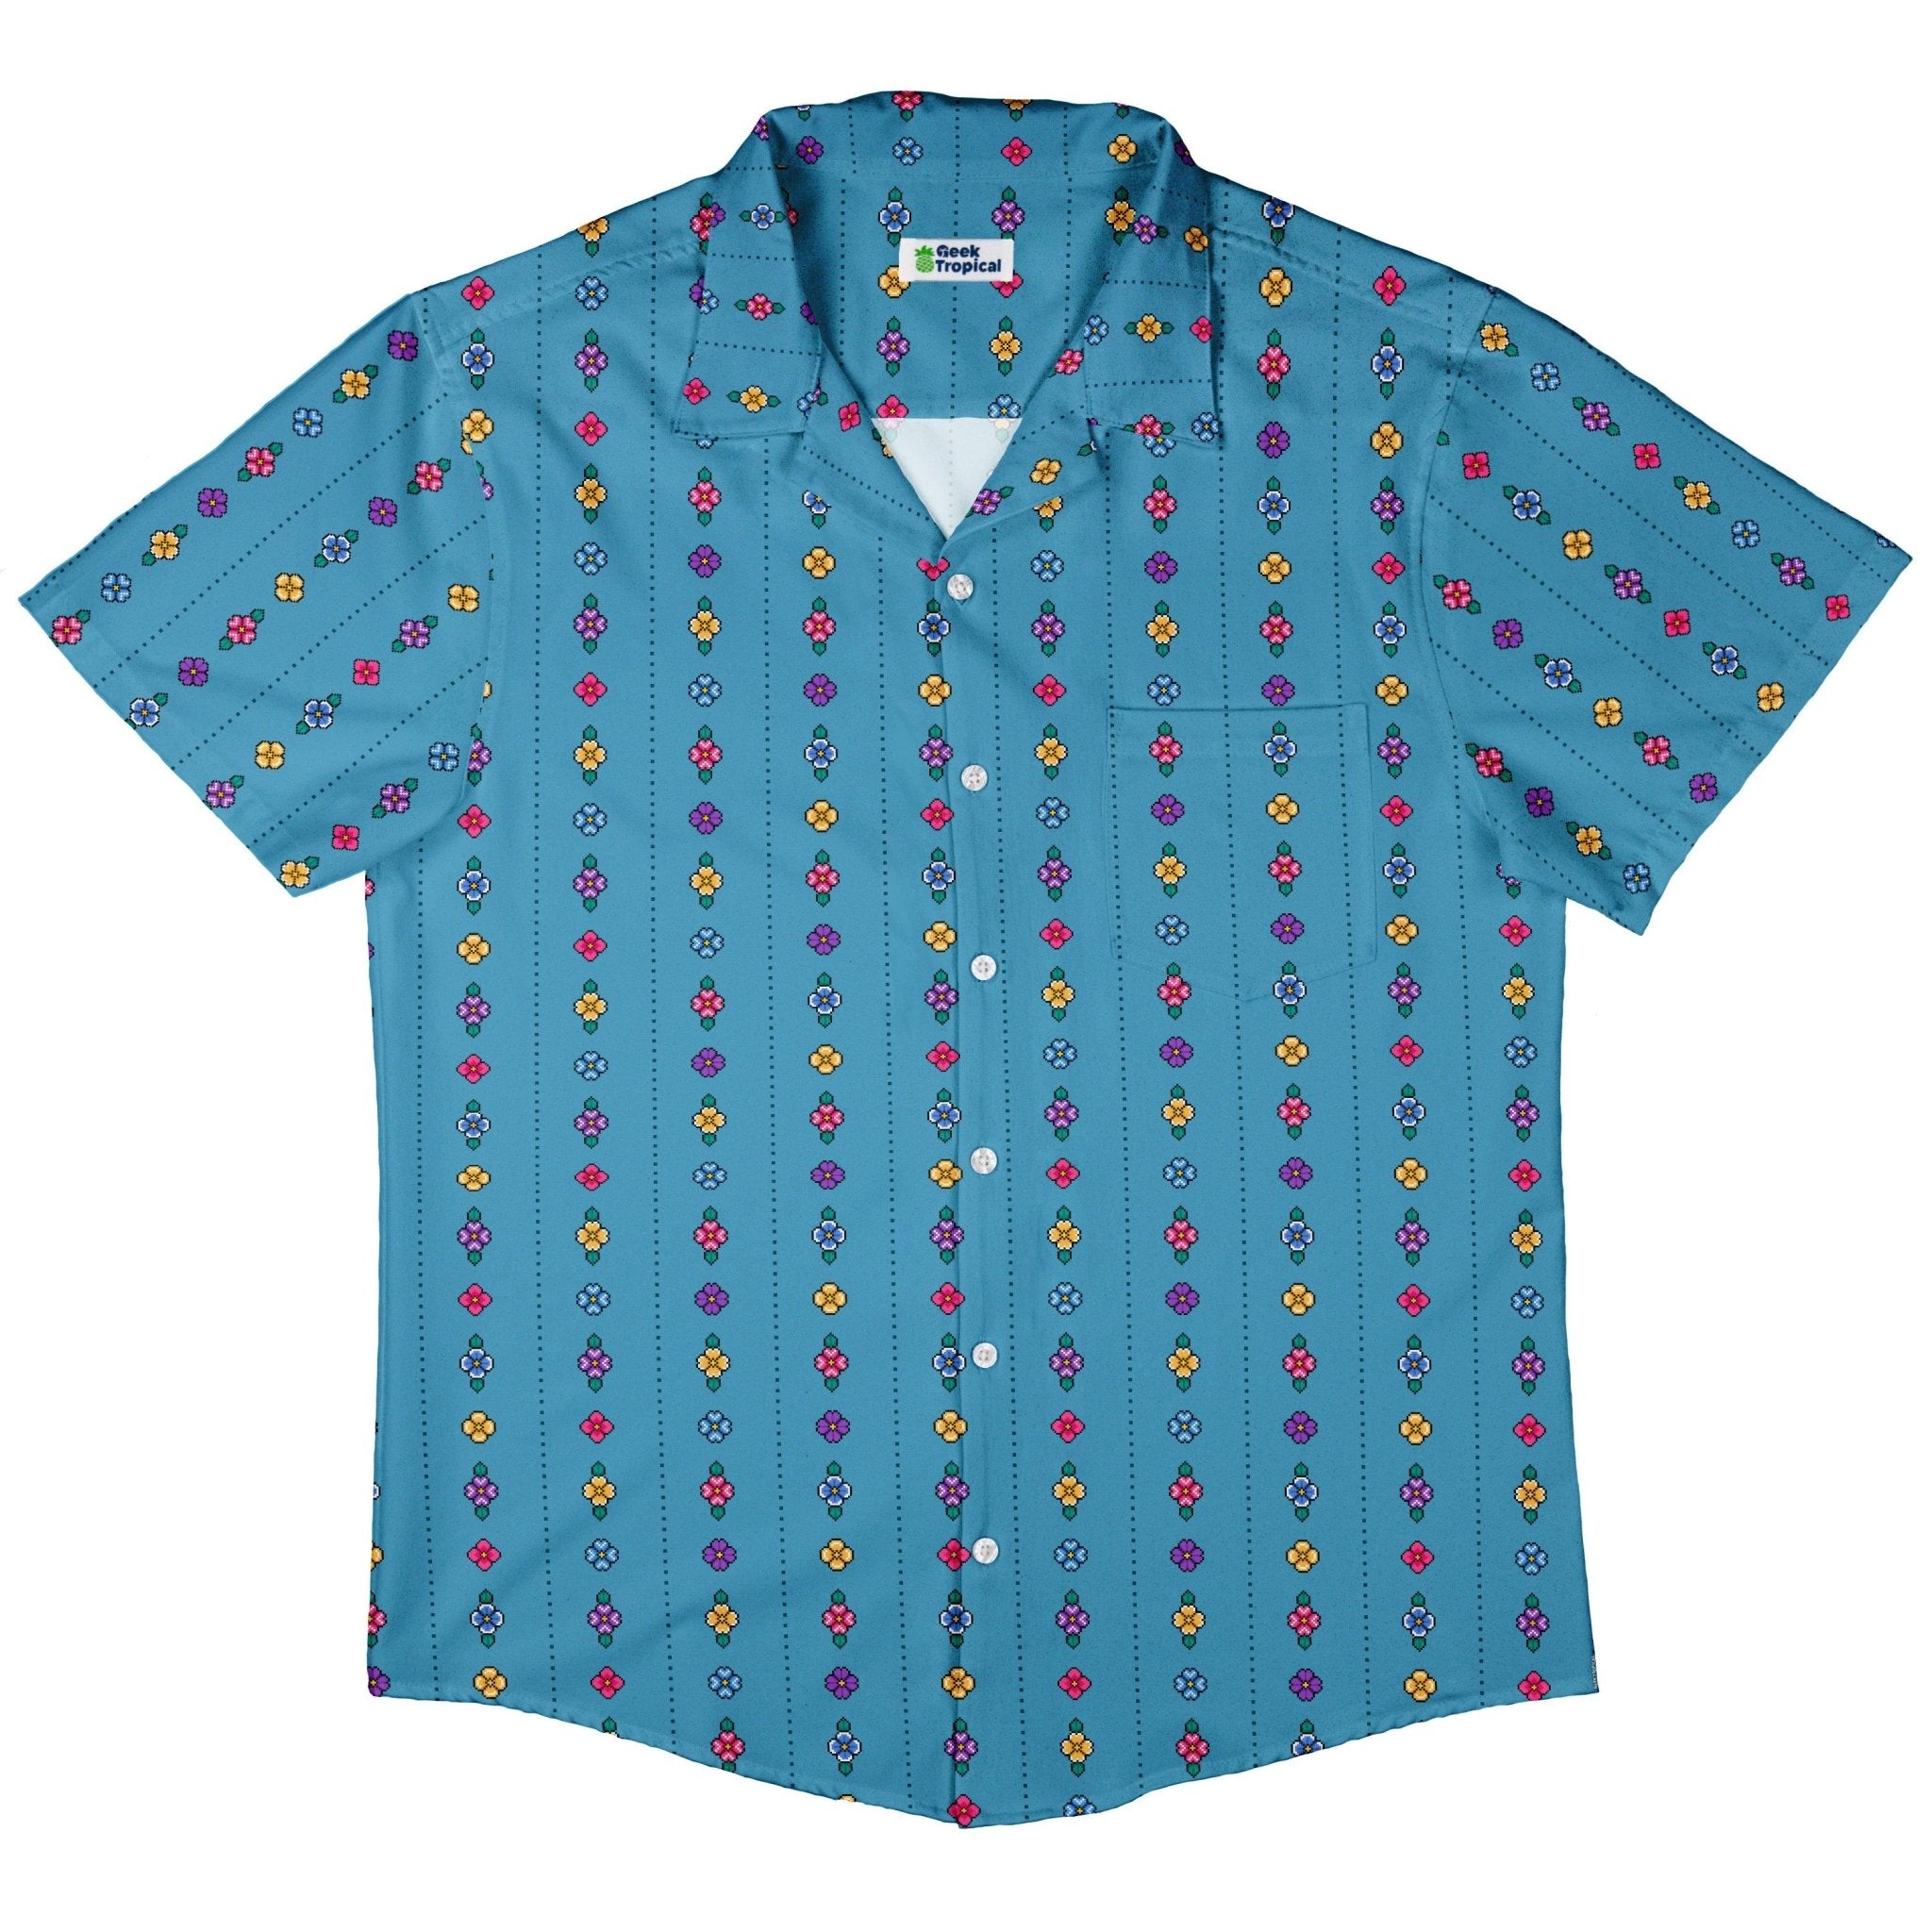 Arcade Pixel Flowers Button Up Shirt - adult sizing - Design by Dunking Toast - Simple Patterns